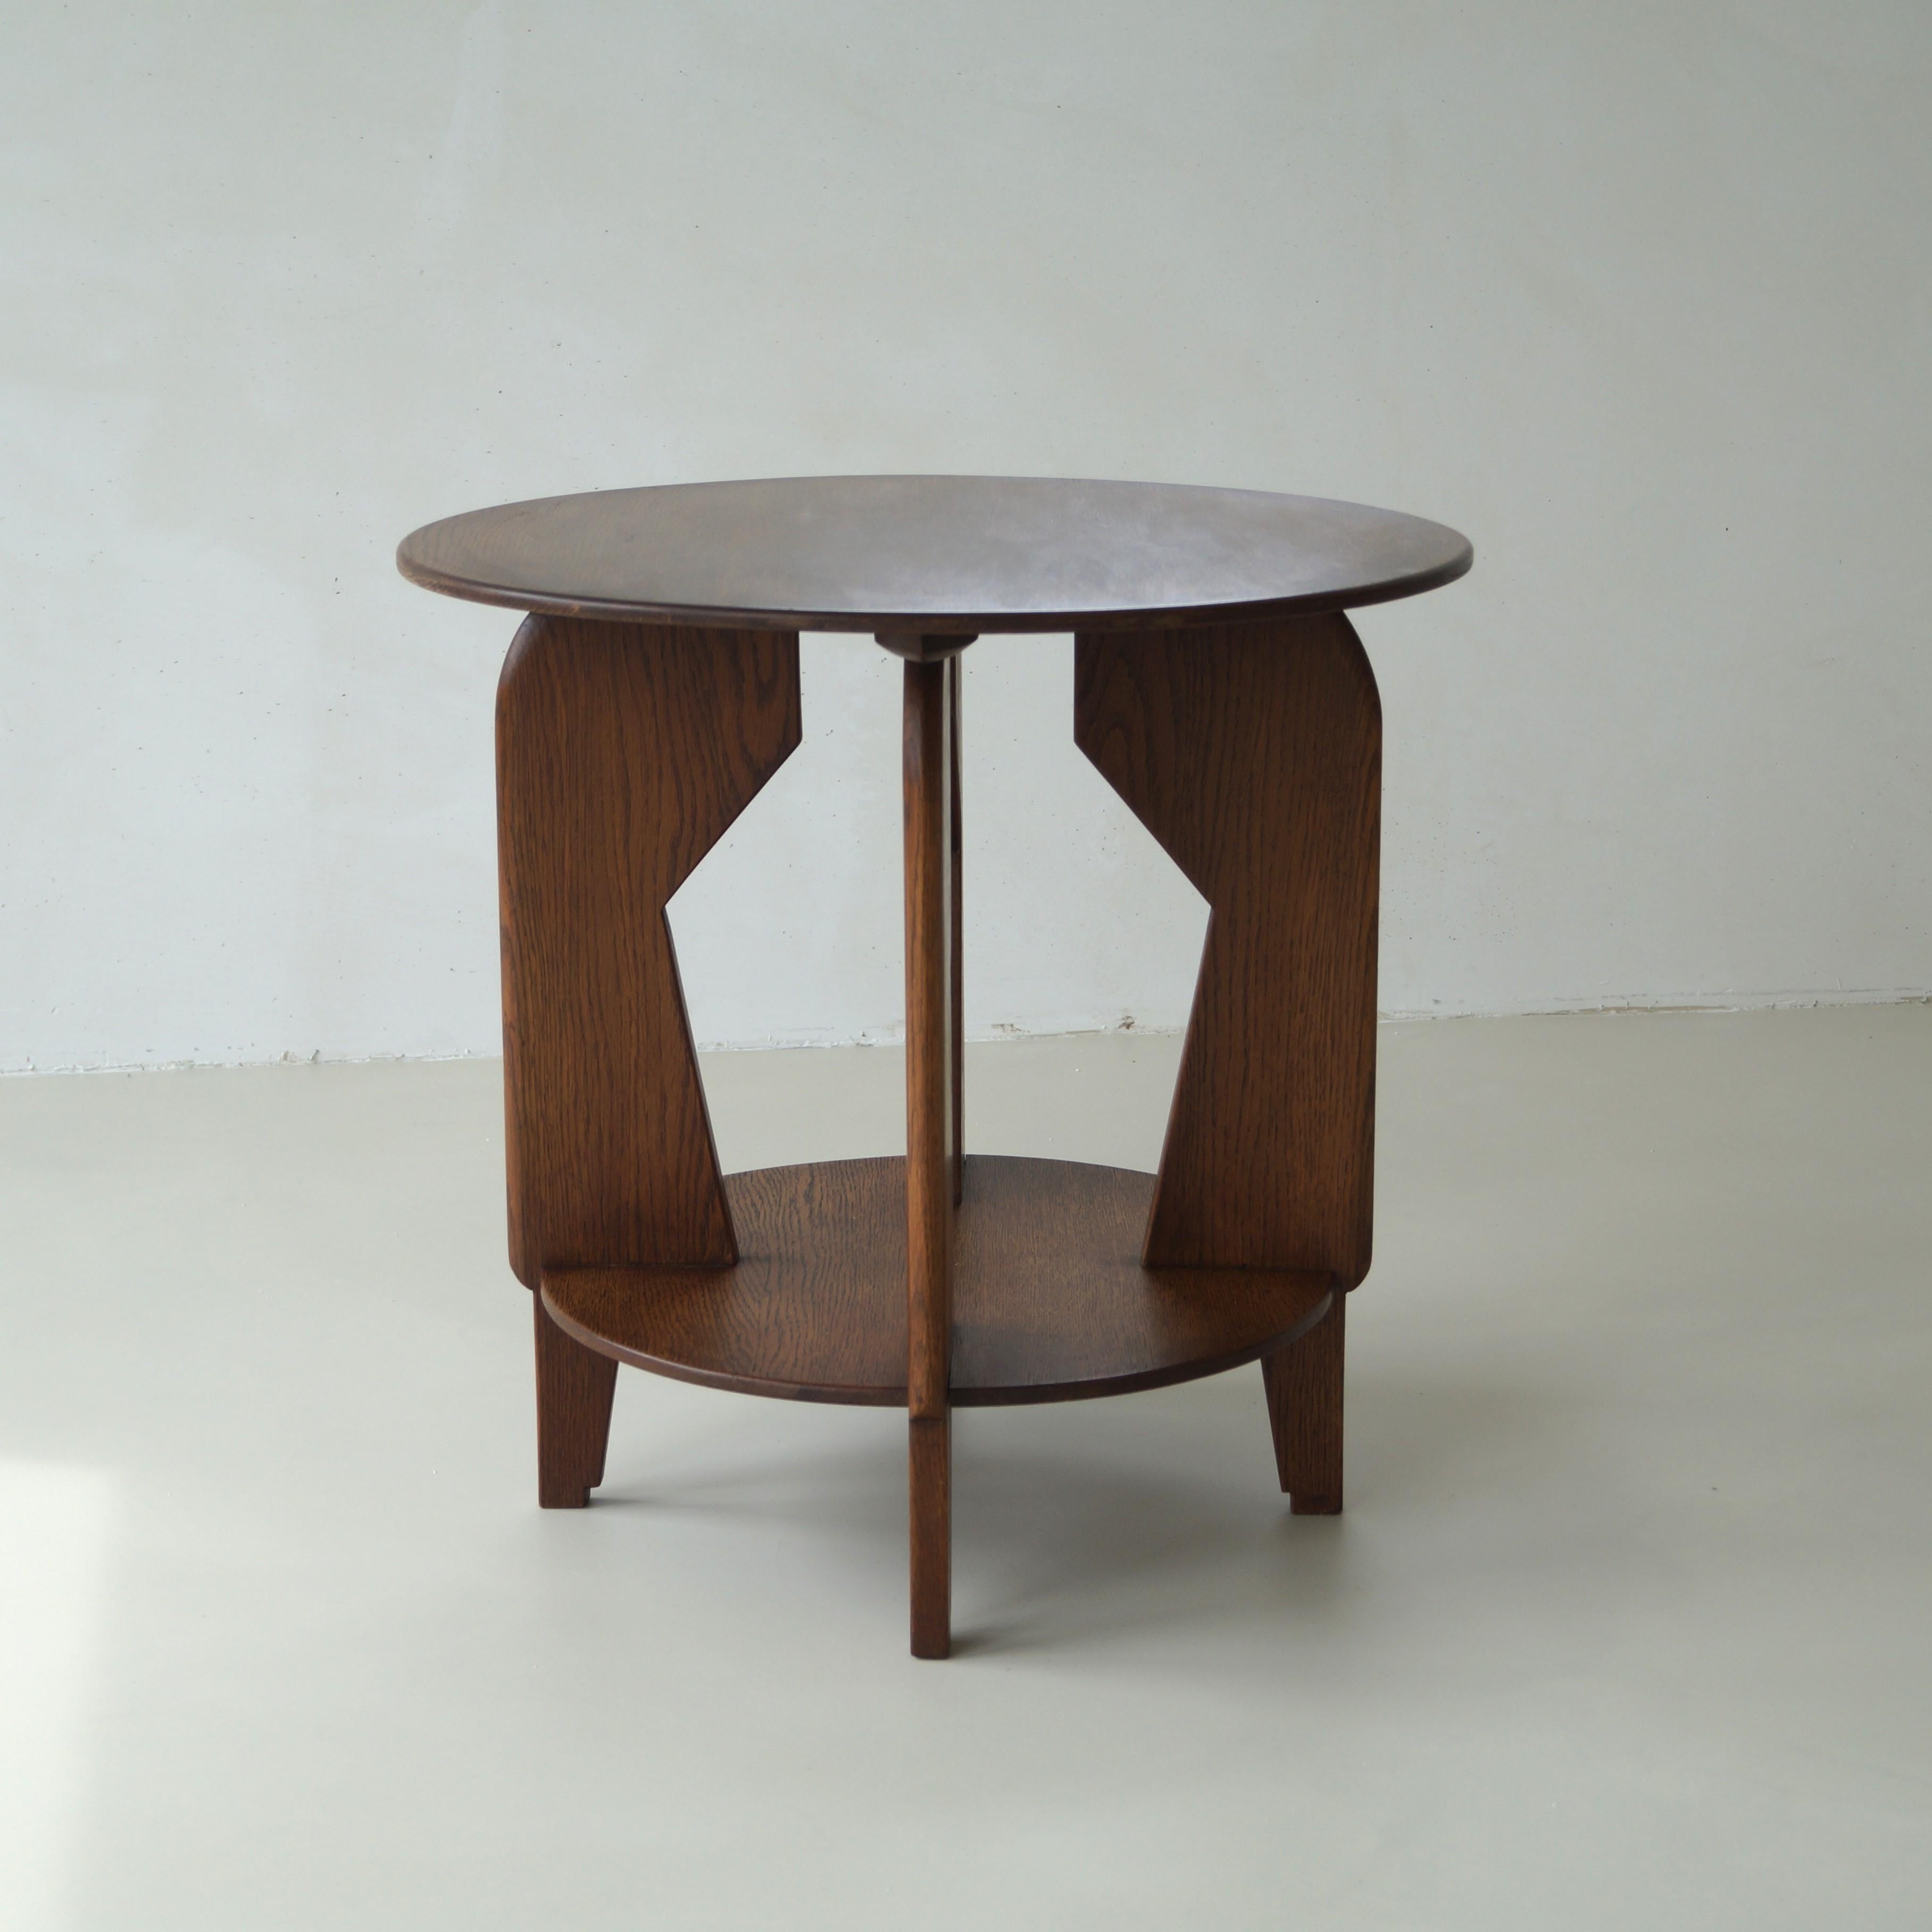 Dutch Art Deco occasional table or side table, late 1920s to early 1930s, in solid oak with modernist lines.  It is quite an unusual and stylish design with a modernist twist.

The style is more The Hague School but has some characteristics of